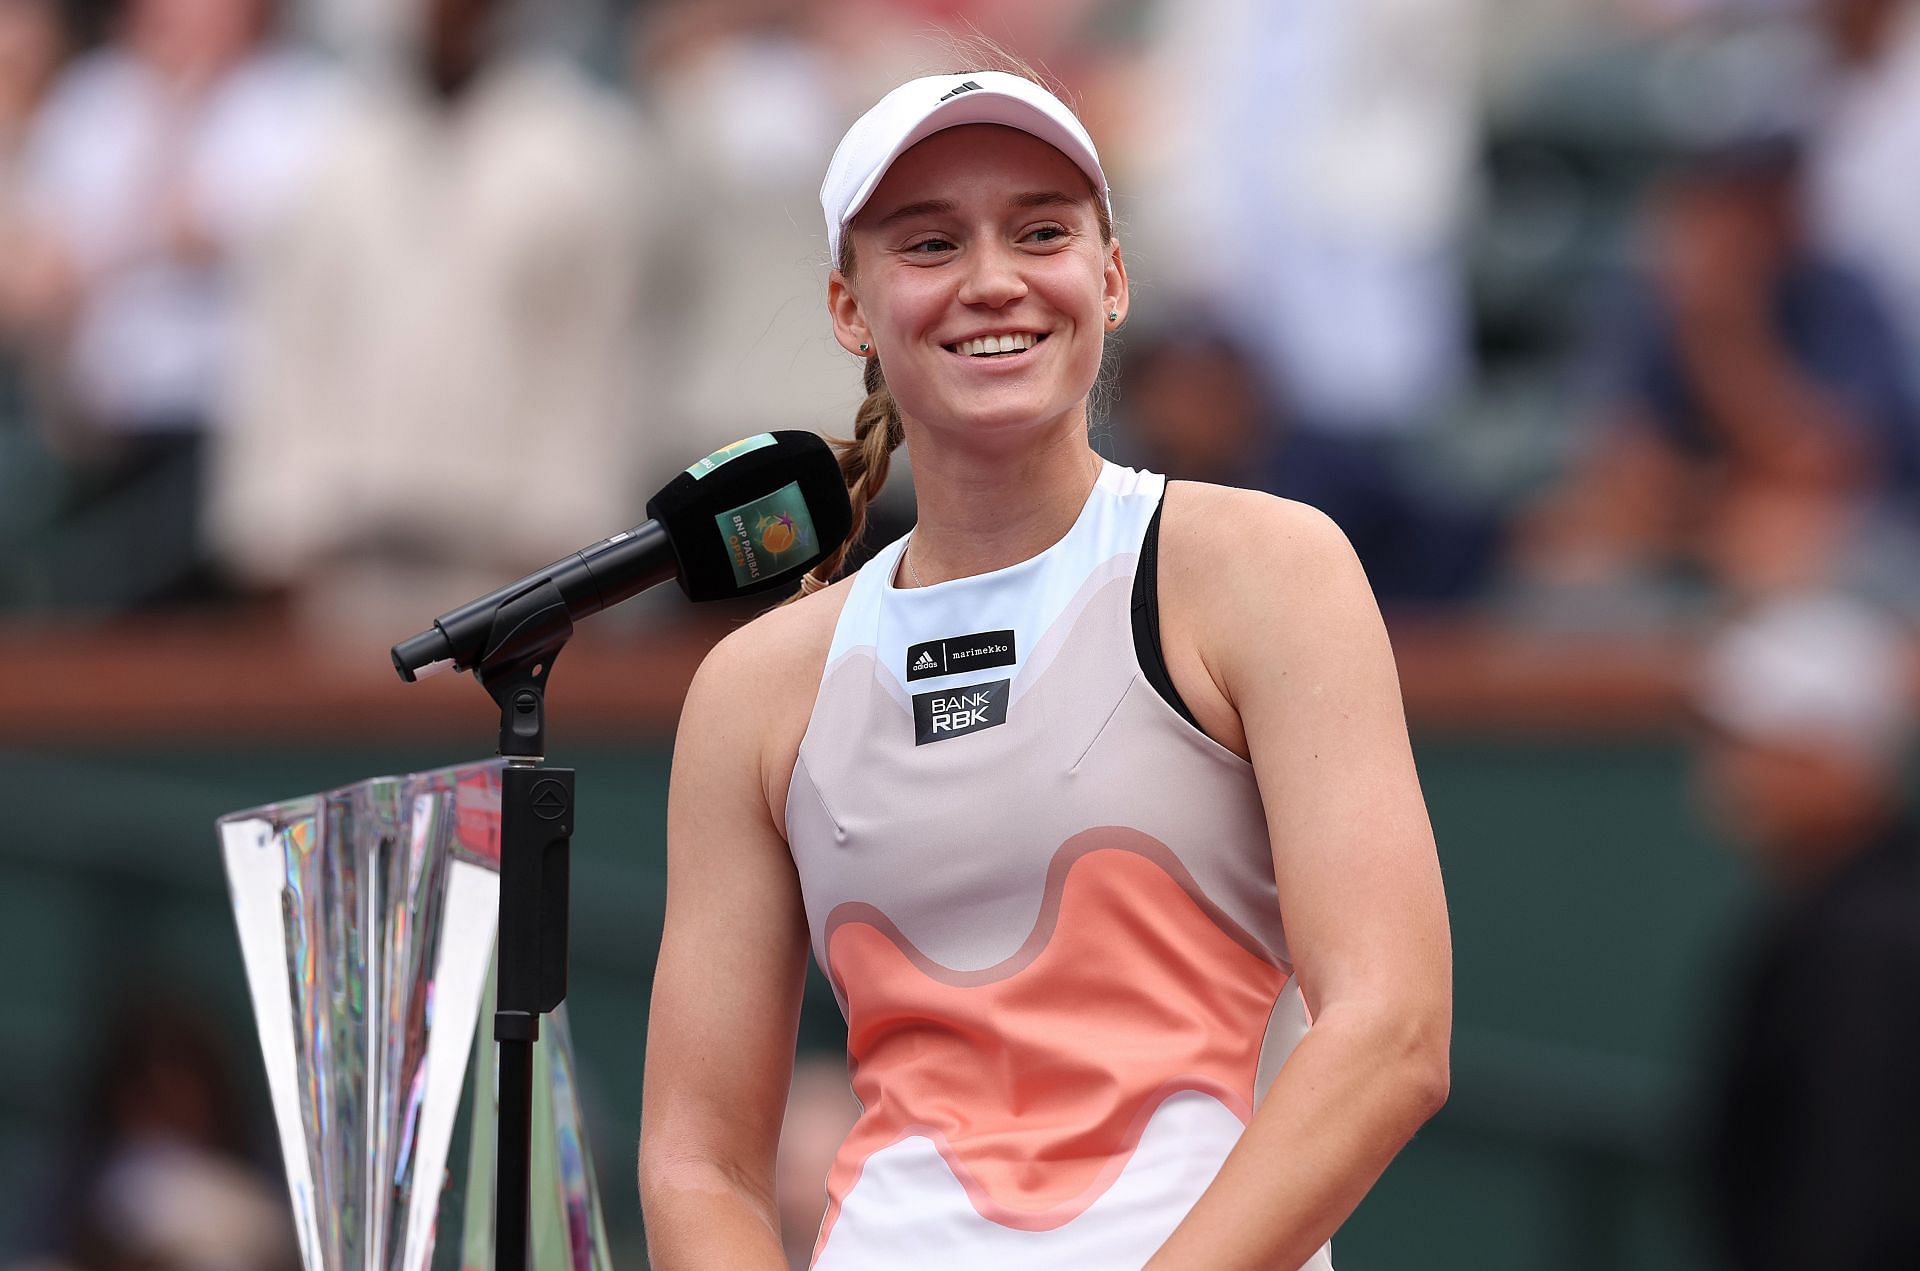 Miami Open 2023 Schedule Today: TV schedule, start time, order of play